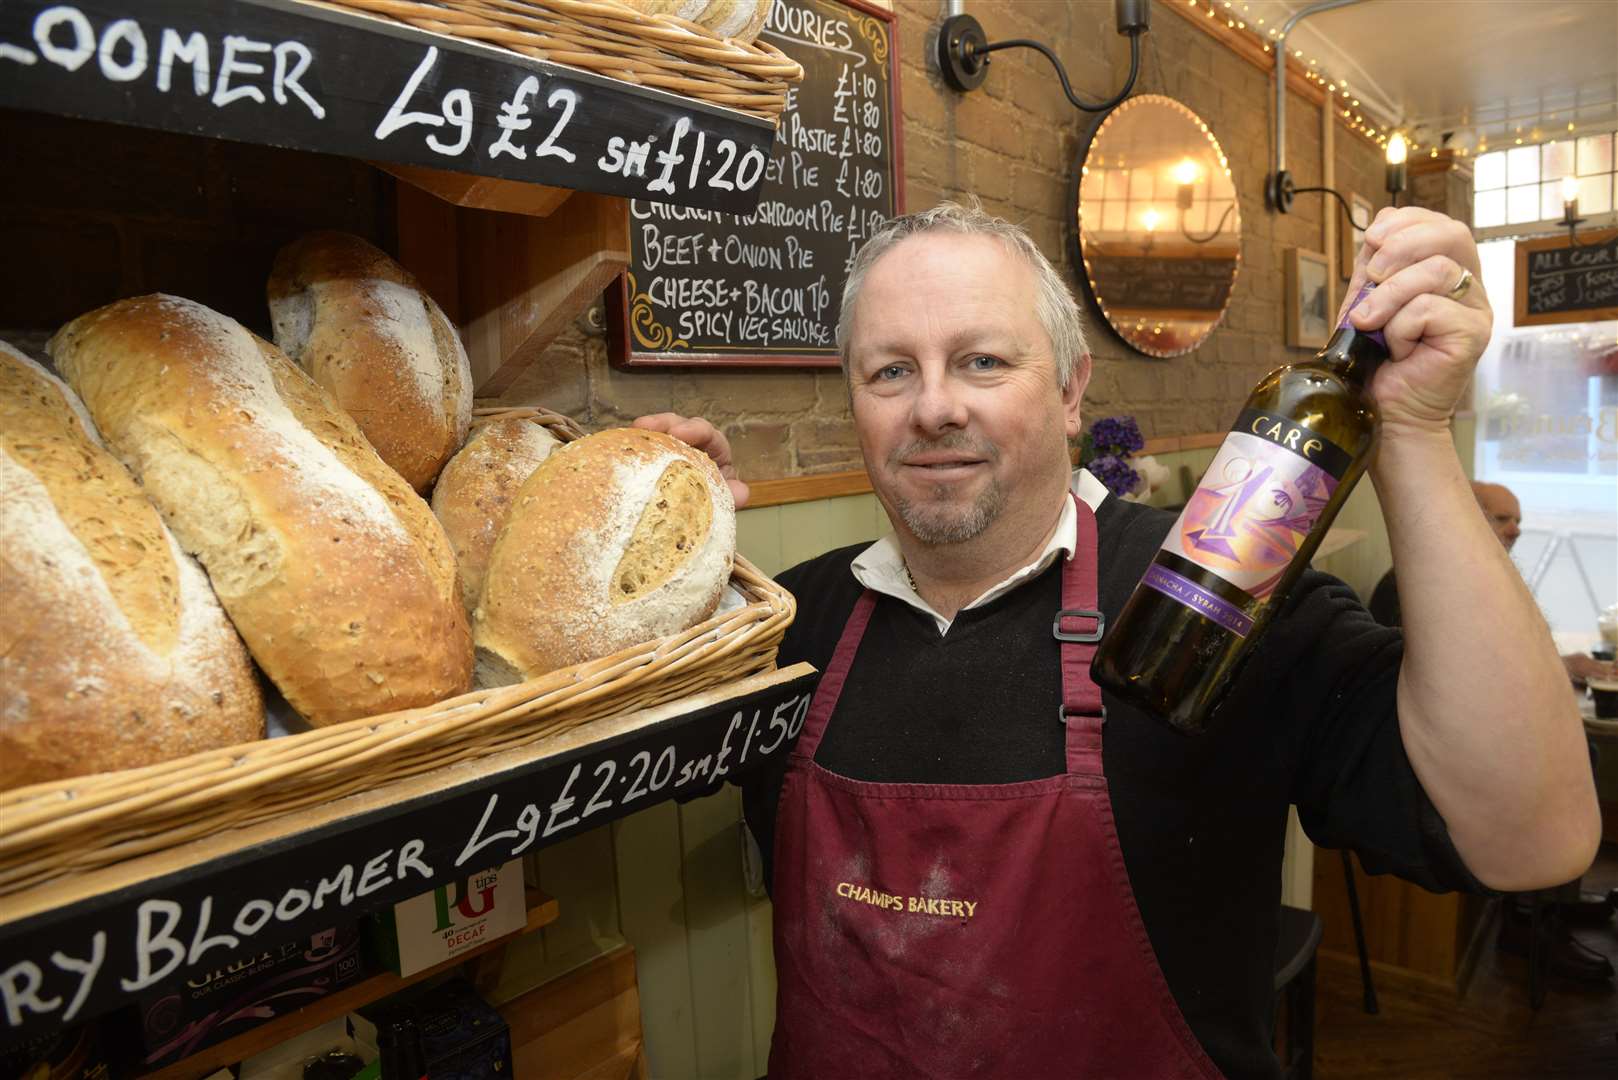 Baker Geoff Champs has transformed his business